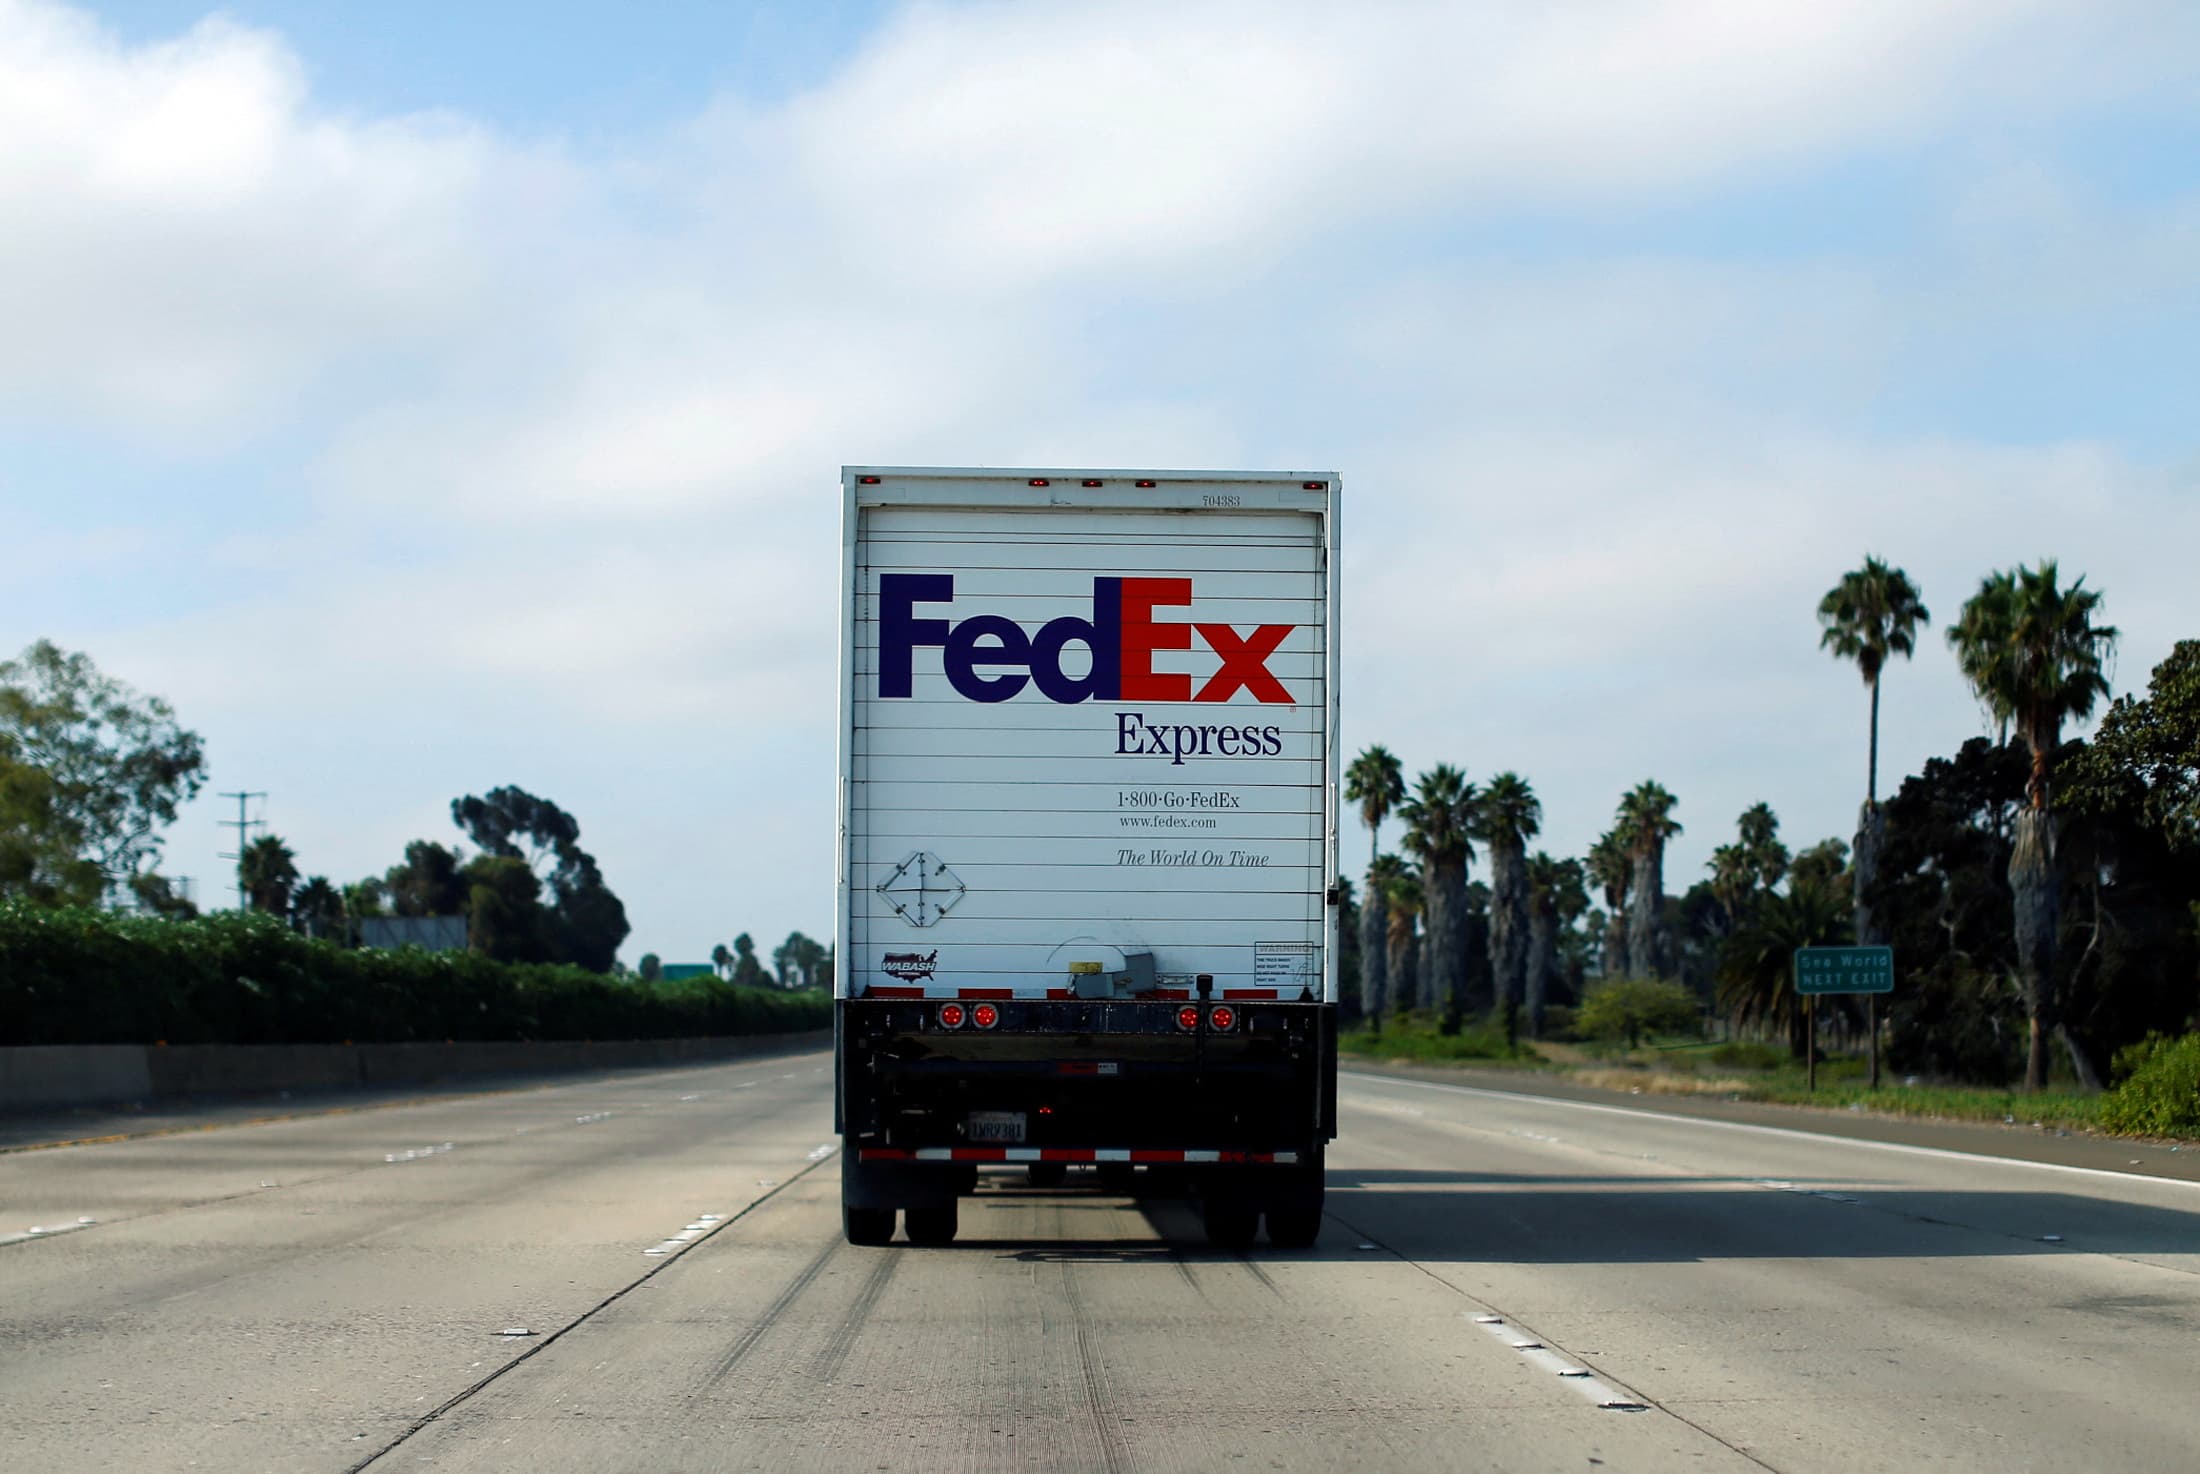 FedEx's fiasco sends another sell signal. But some stocks won't be hit as hard